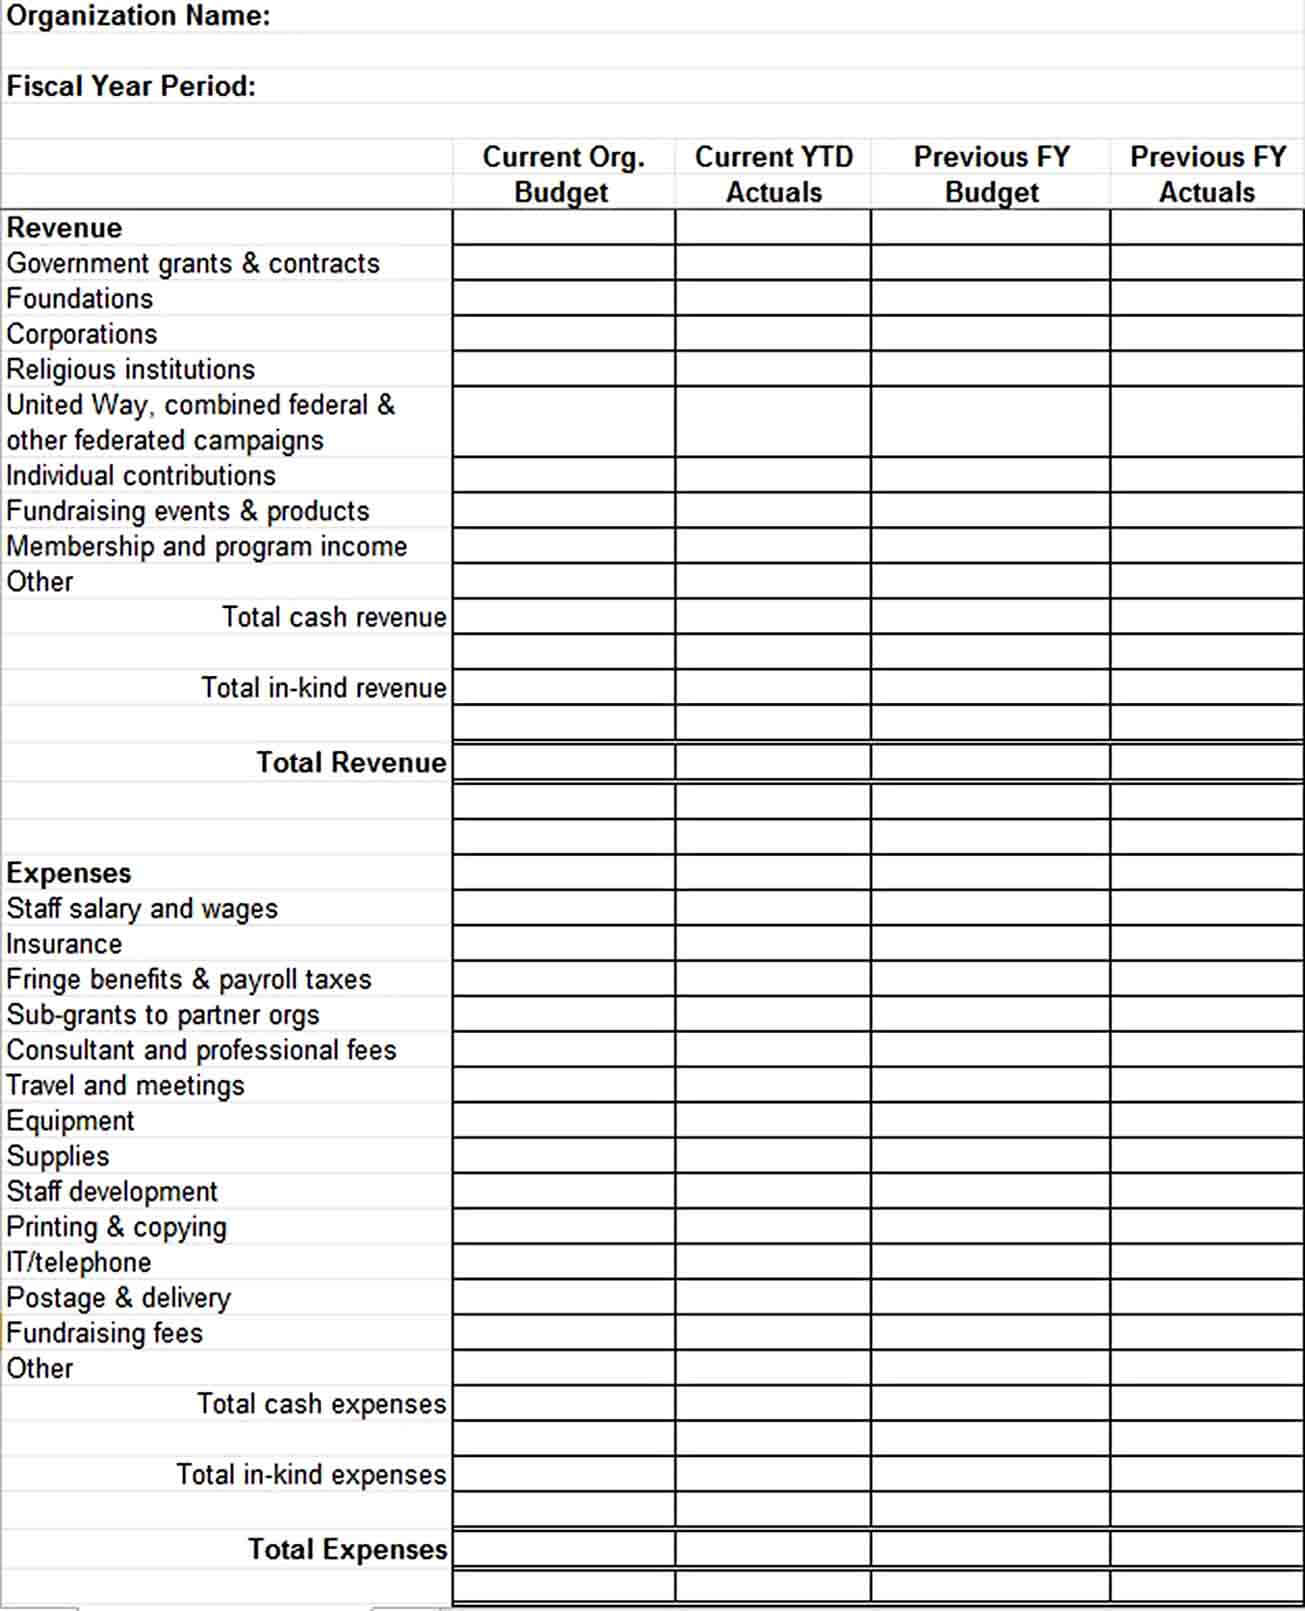 Operating Budget Sample Template  Throughout Operating Budget For Non Profit Template Inside Operating Budget For Non Profit Template